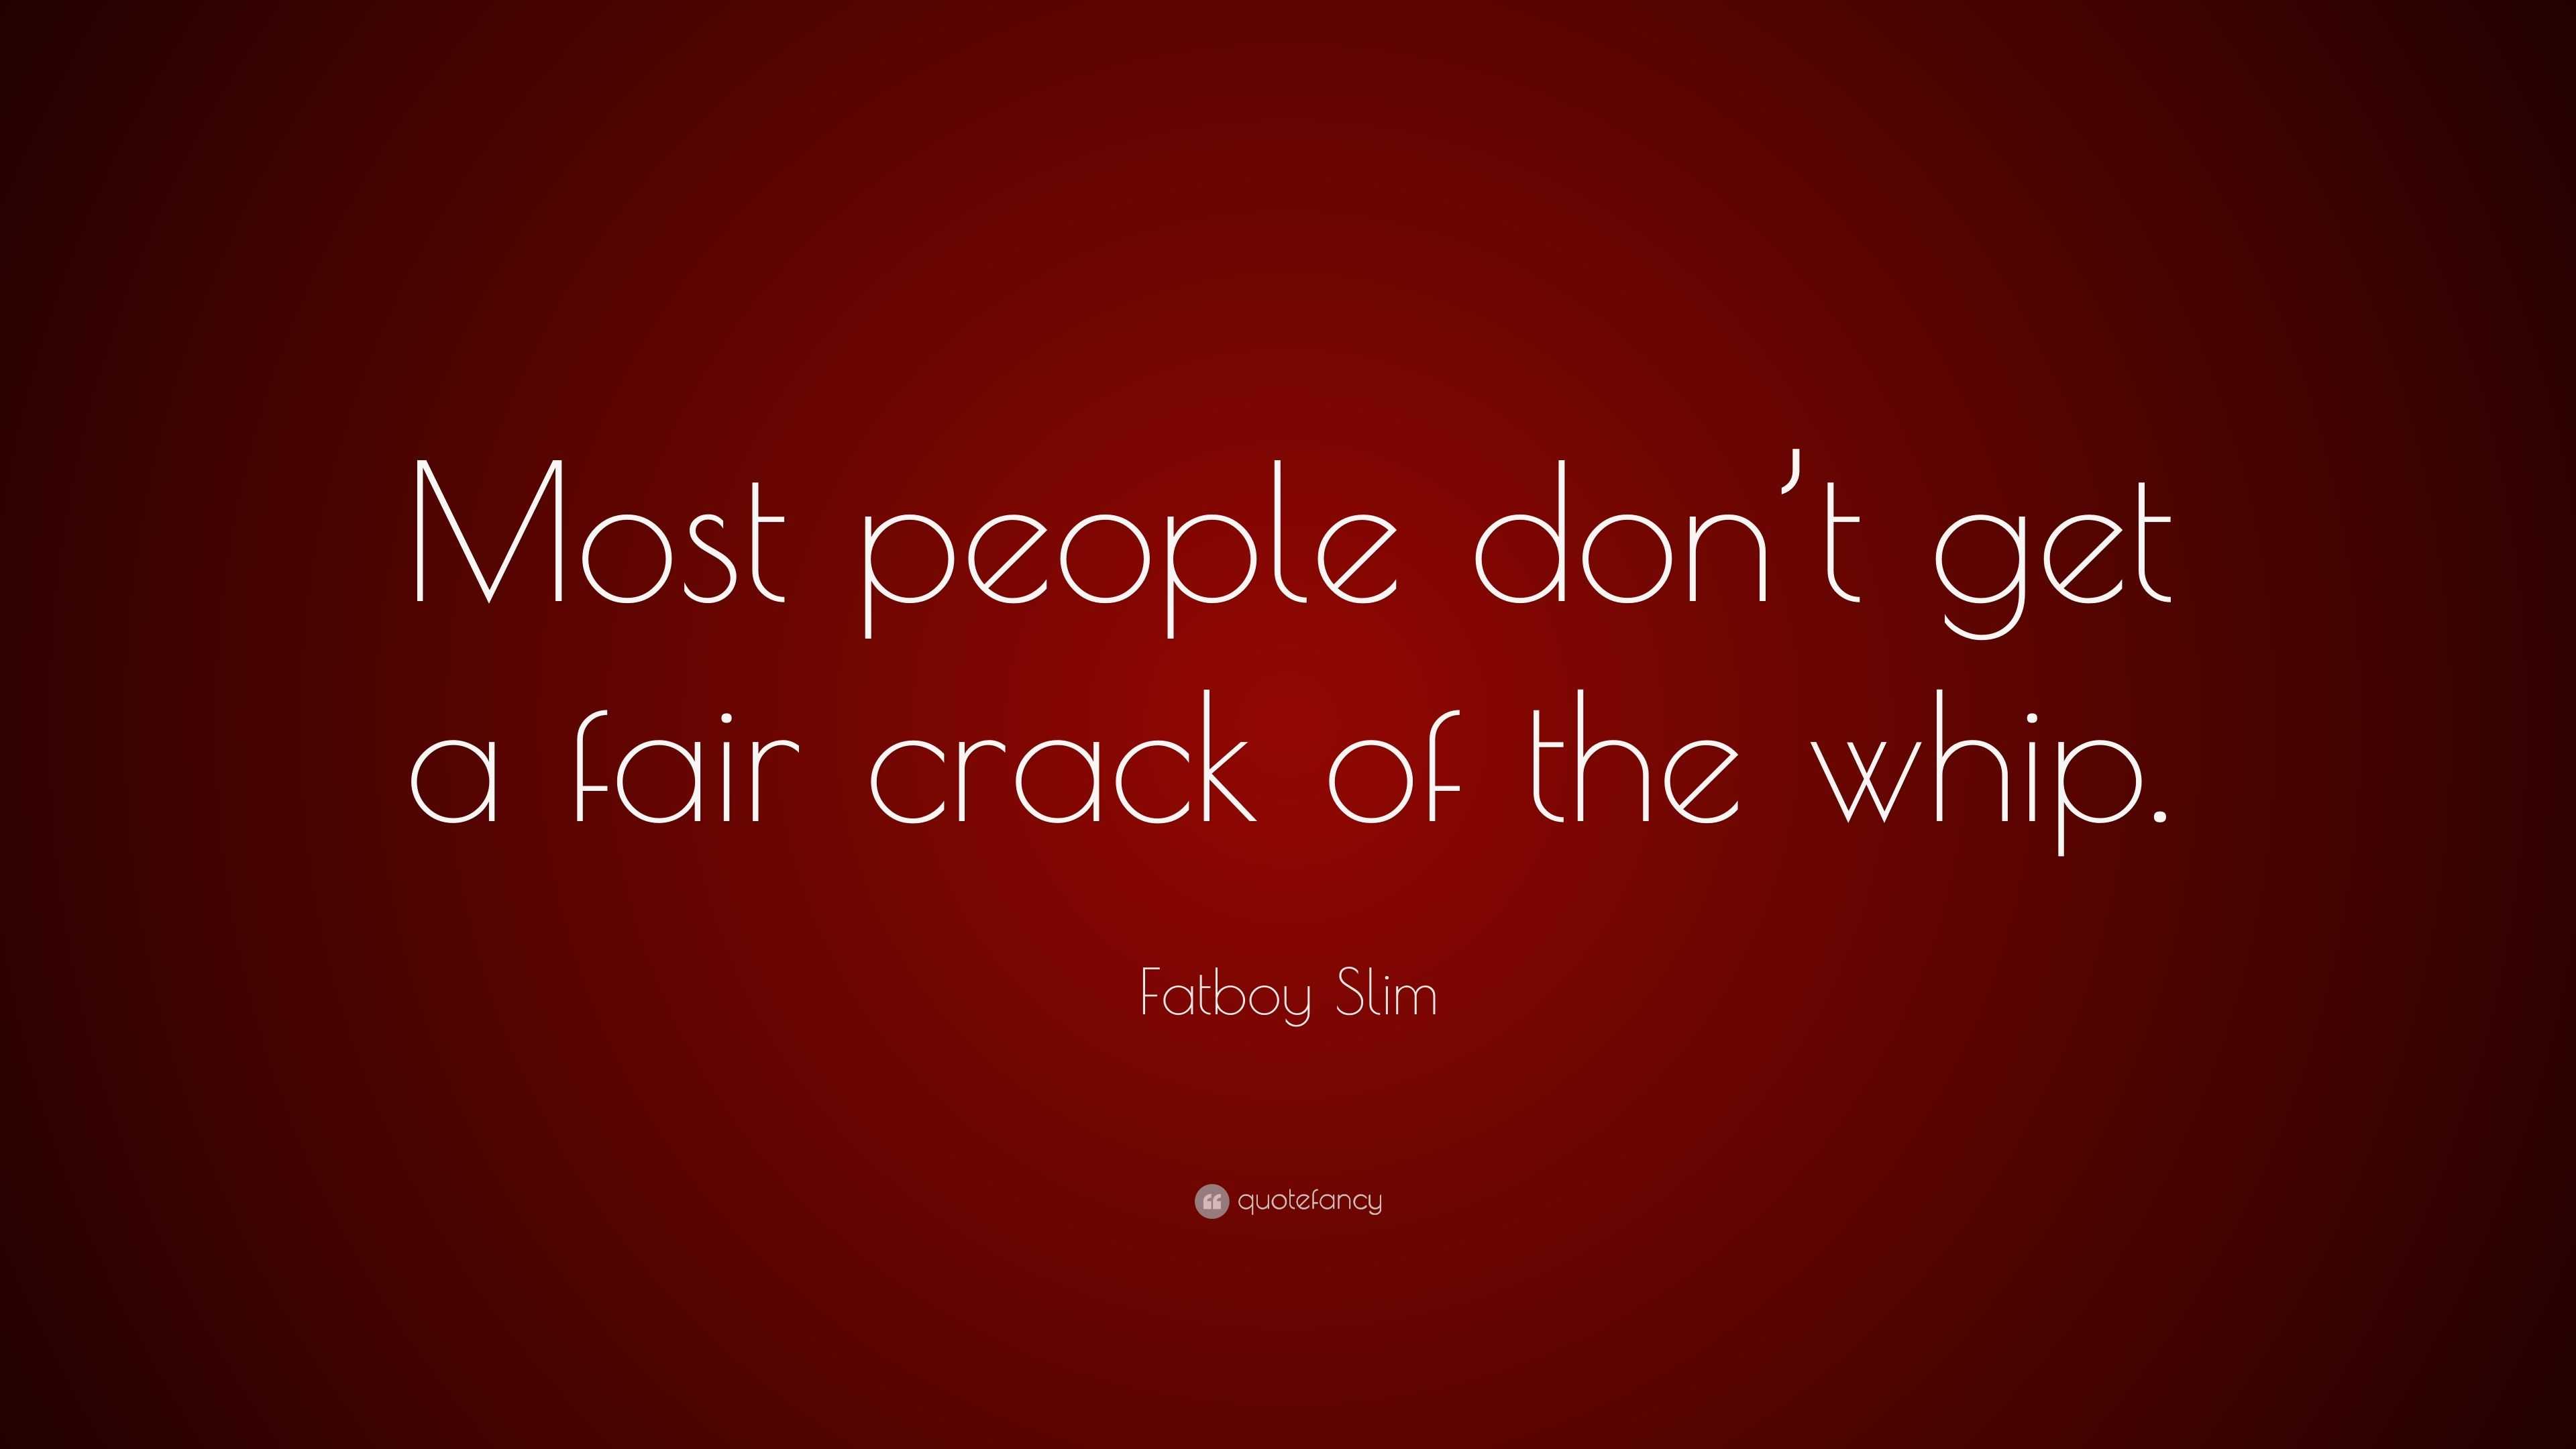 Fatboy Slim Quote: “Most people don’t get a fair crack of the whip.”